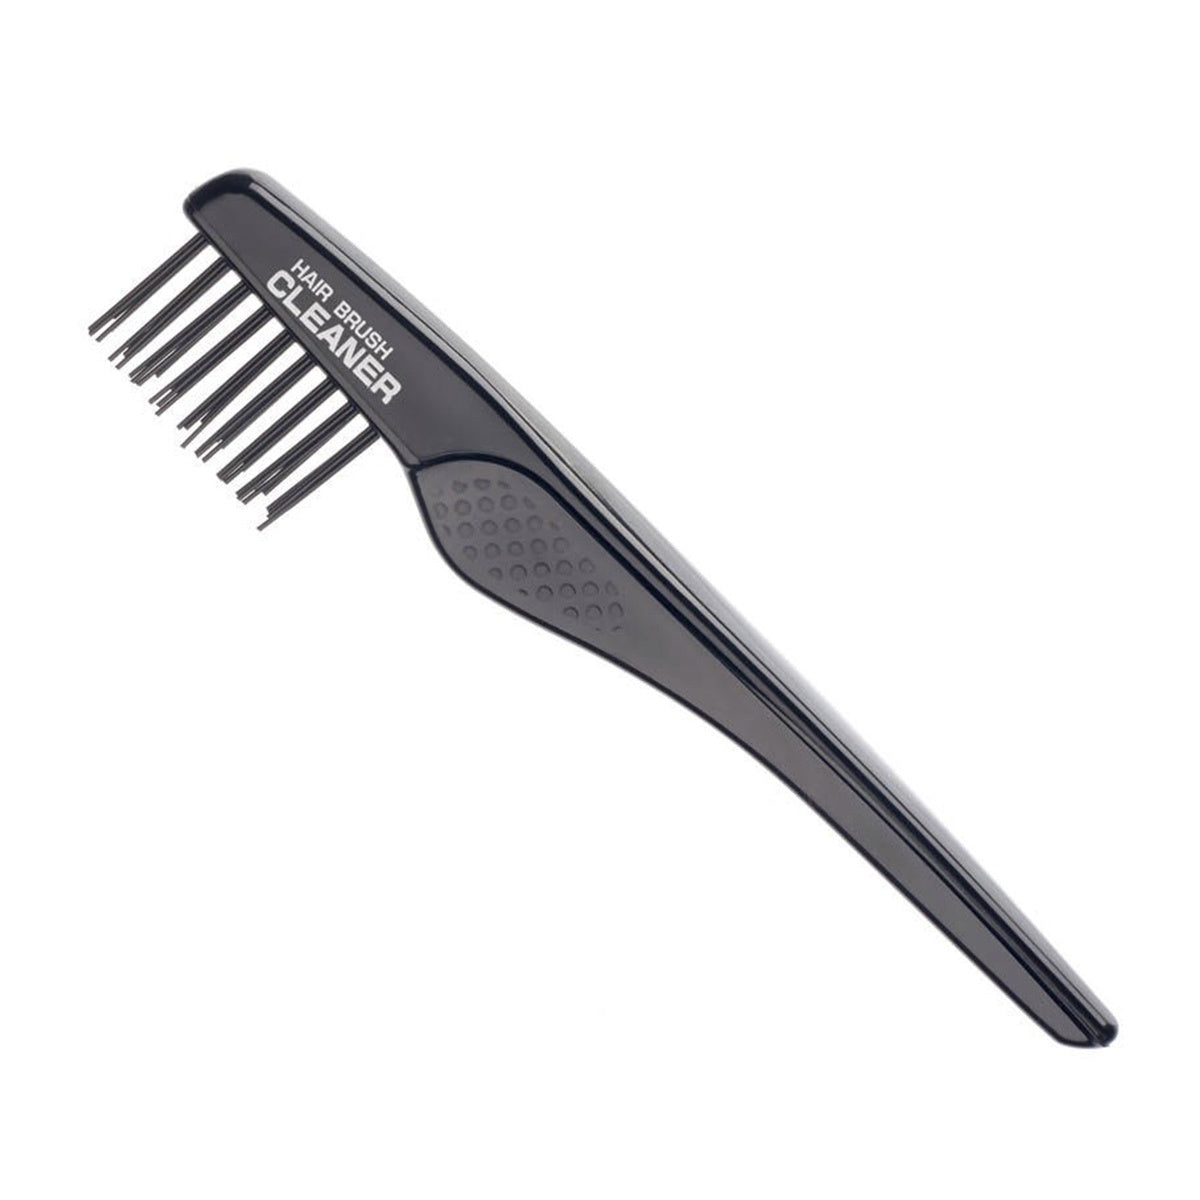 Primary image of Hairbrush Cleaner - L PC2